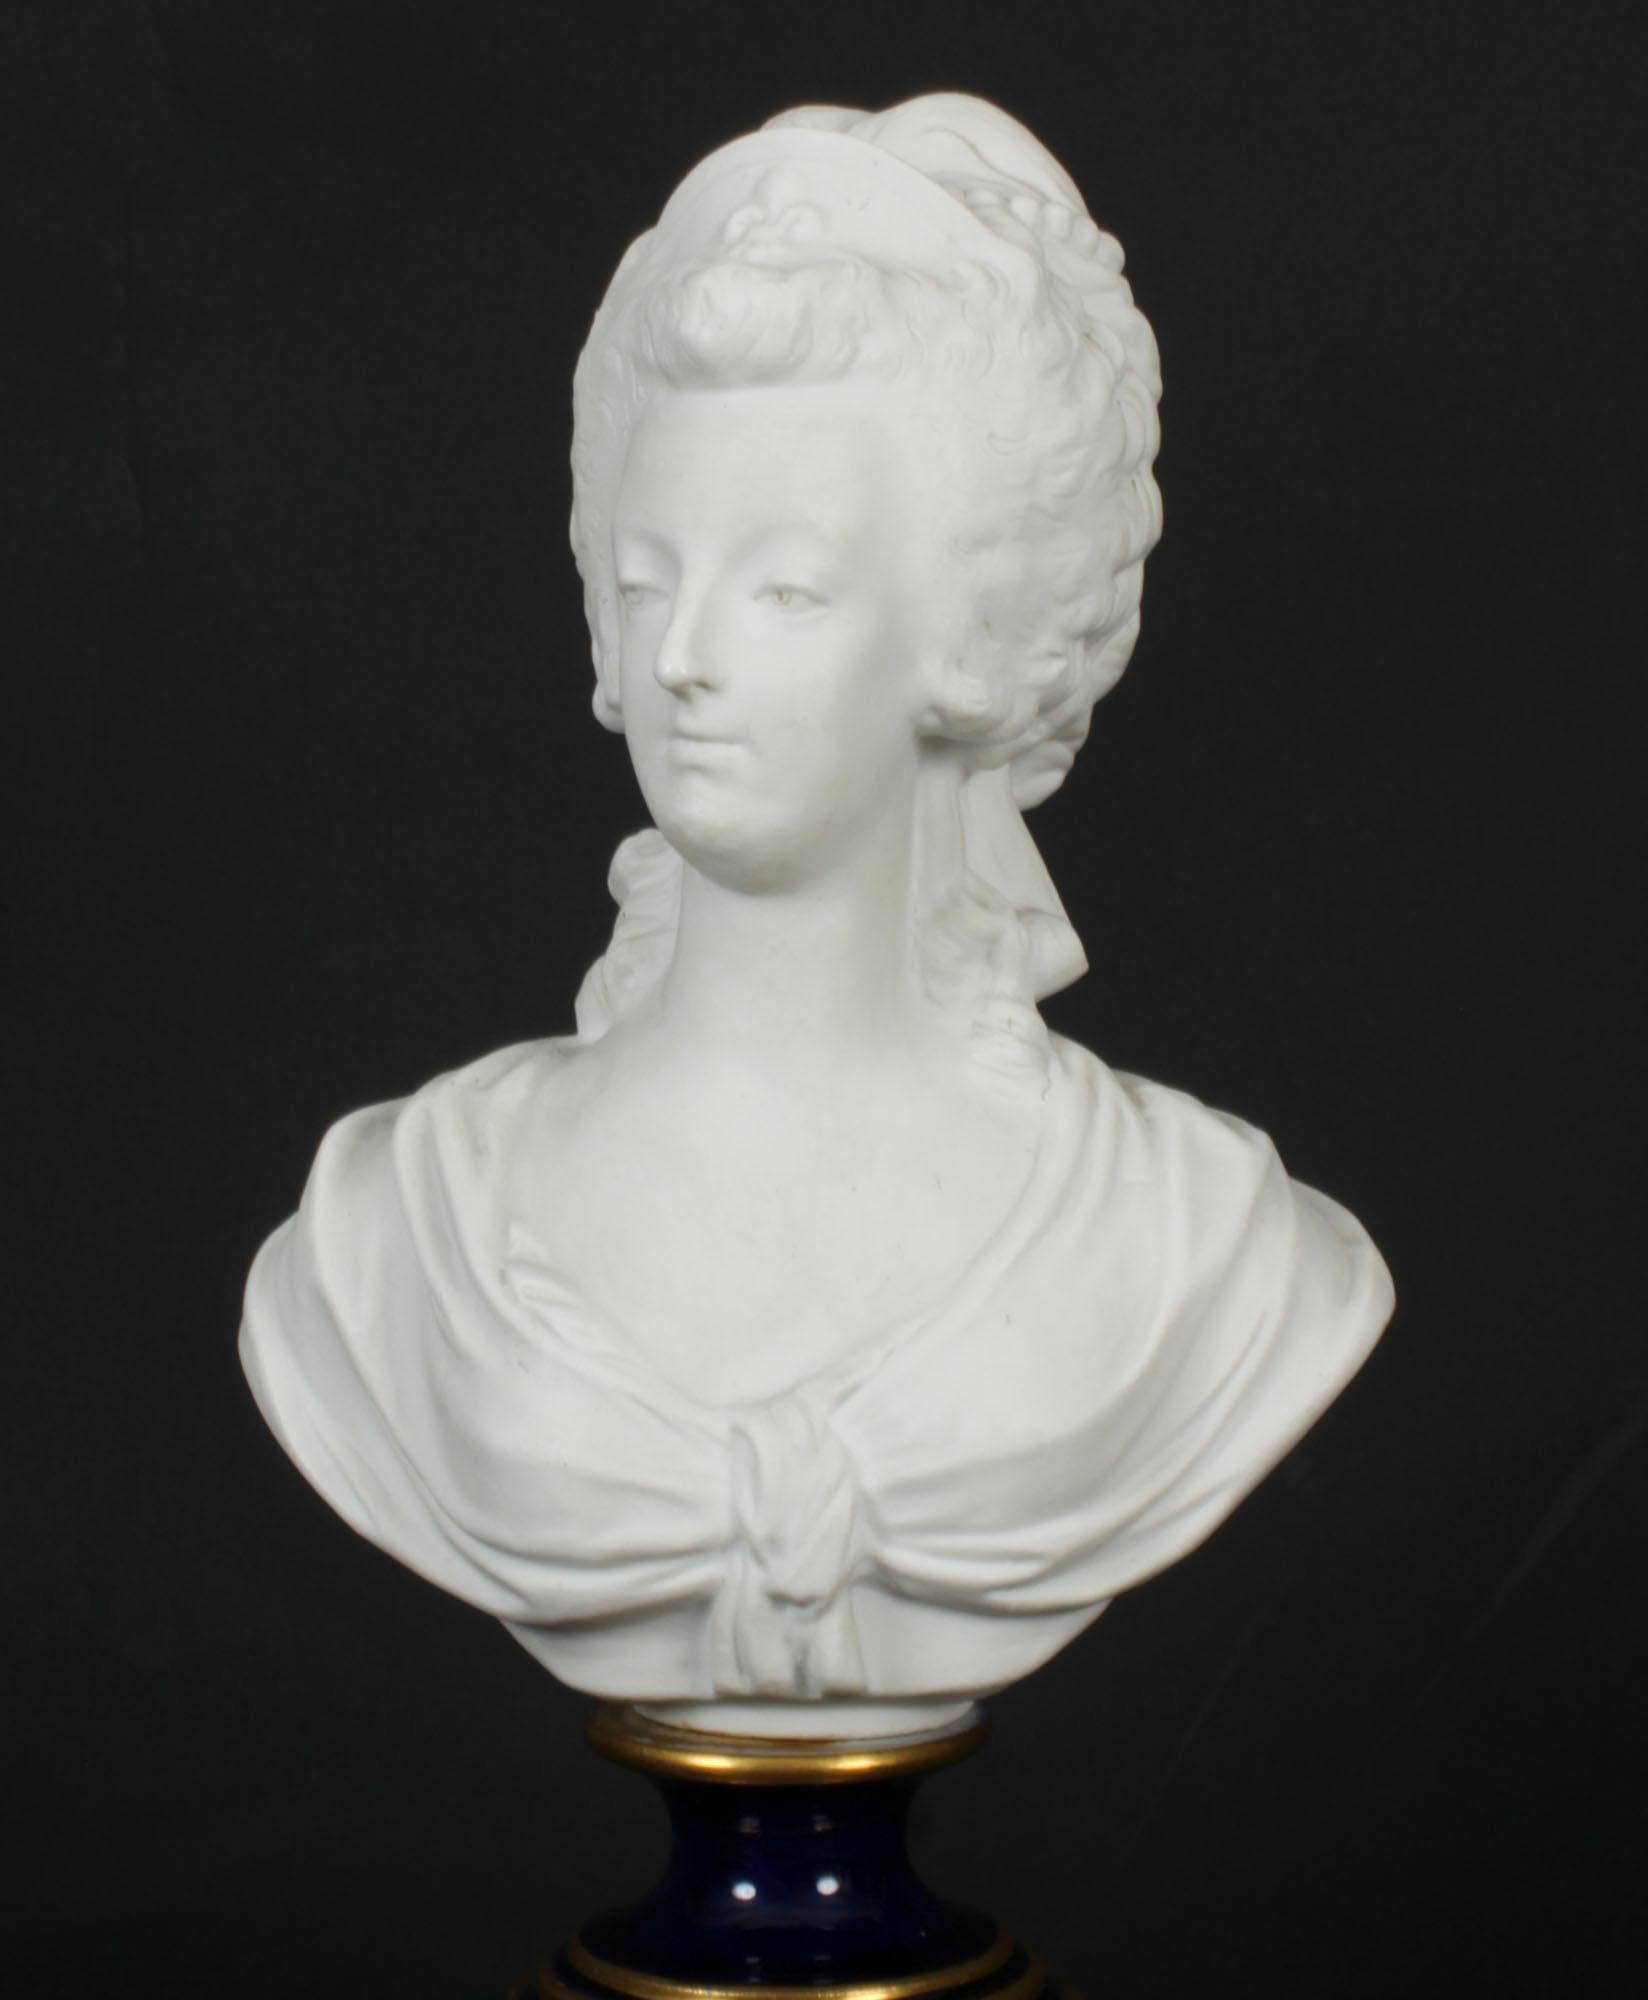 This is a fabulous decorative antique Sevres bisque porcelain bust of Marie Antoinette dating from Circa 1880 and bearing the blue painted interlaced L's Sevres mark.

This is an elegant bust of Marie Antoinette, Queen of France and the wife of